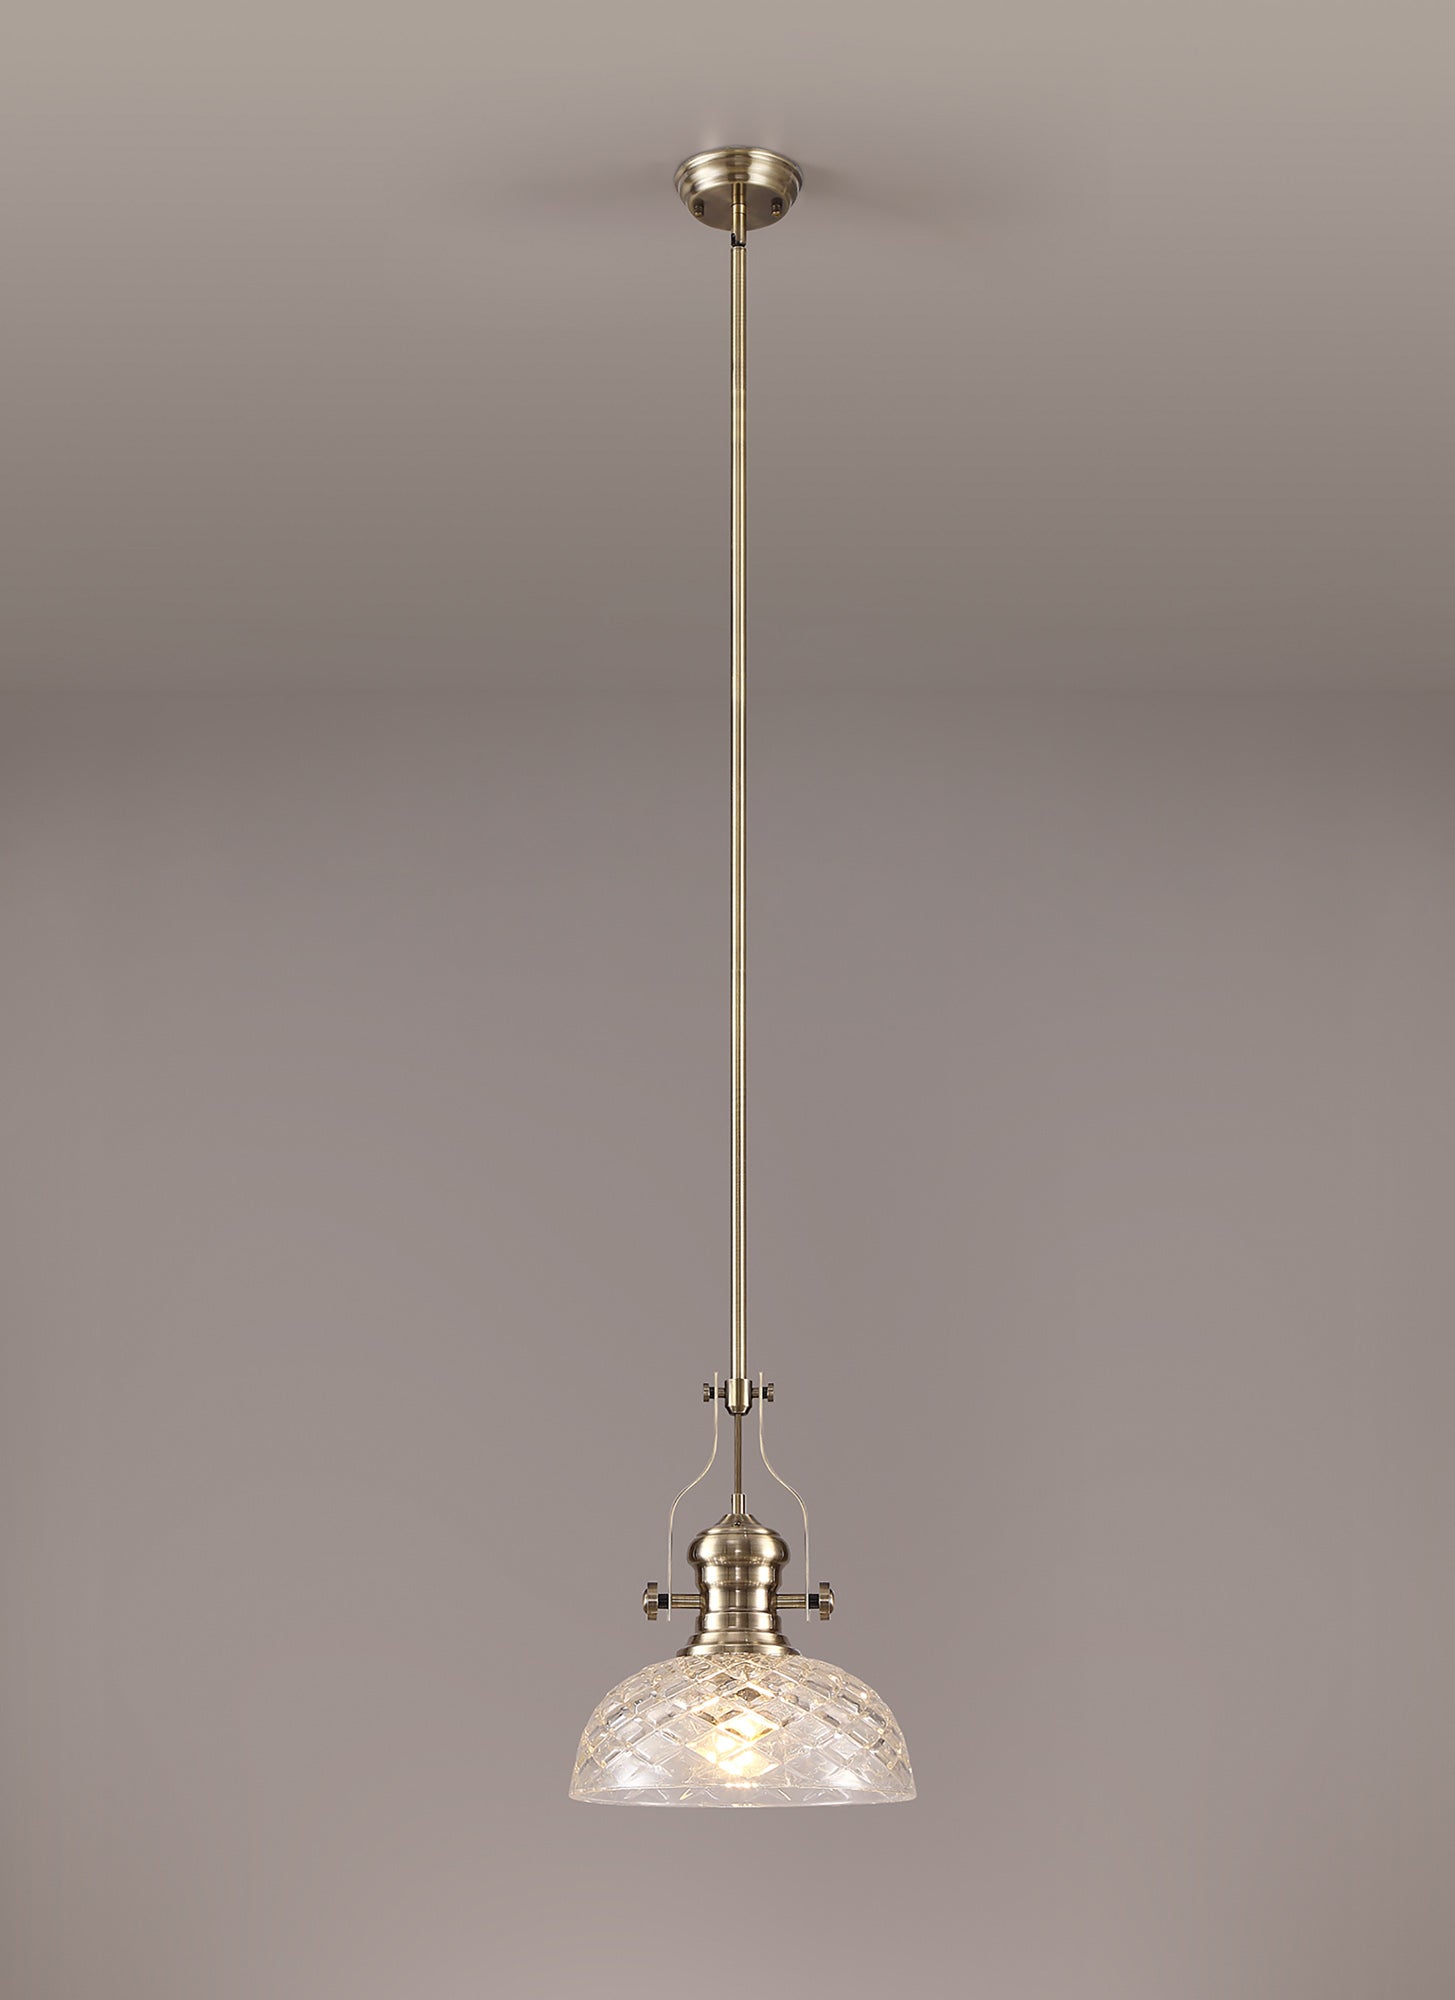 Docker Pendant With 30cm Flat Round Patterned Shade, 1 x E27, Antique Brass/Clear Glass LOK104623